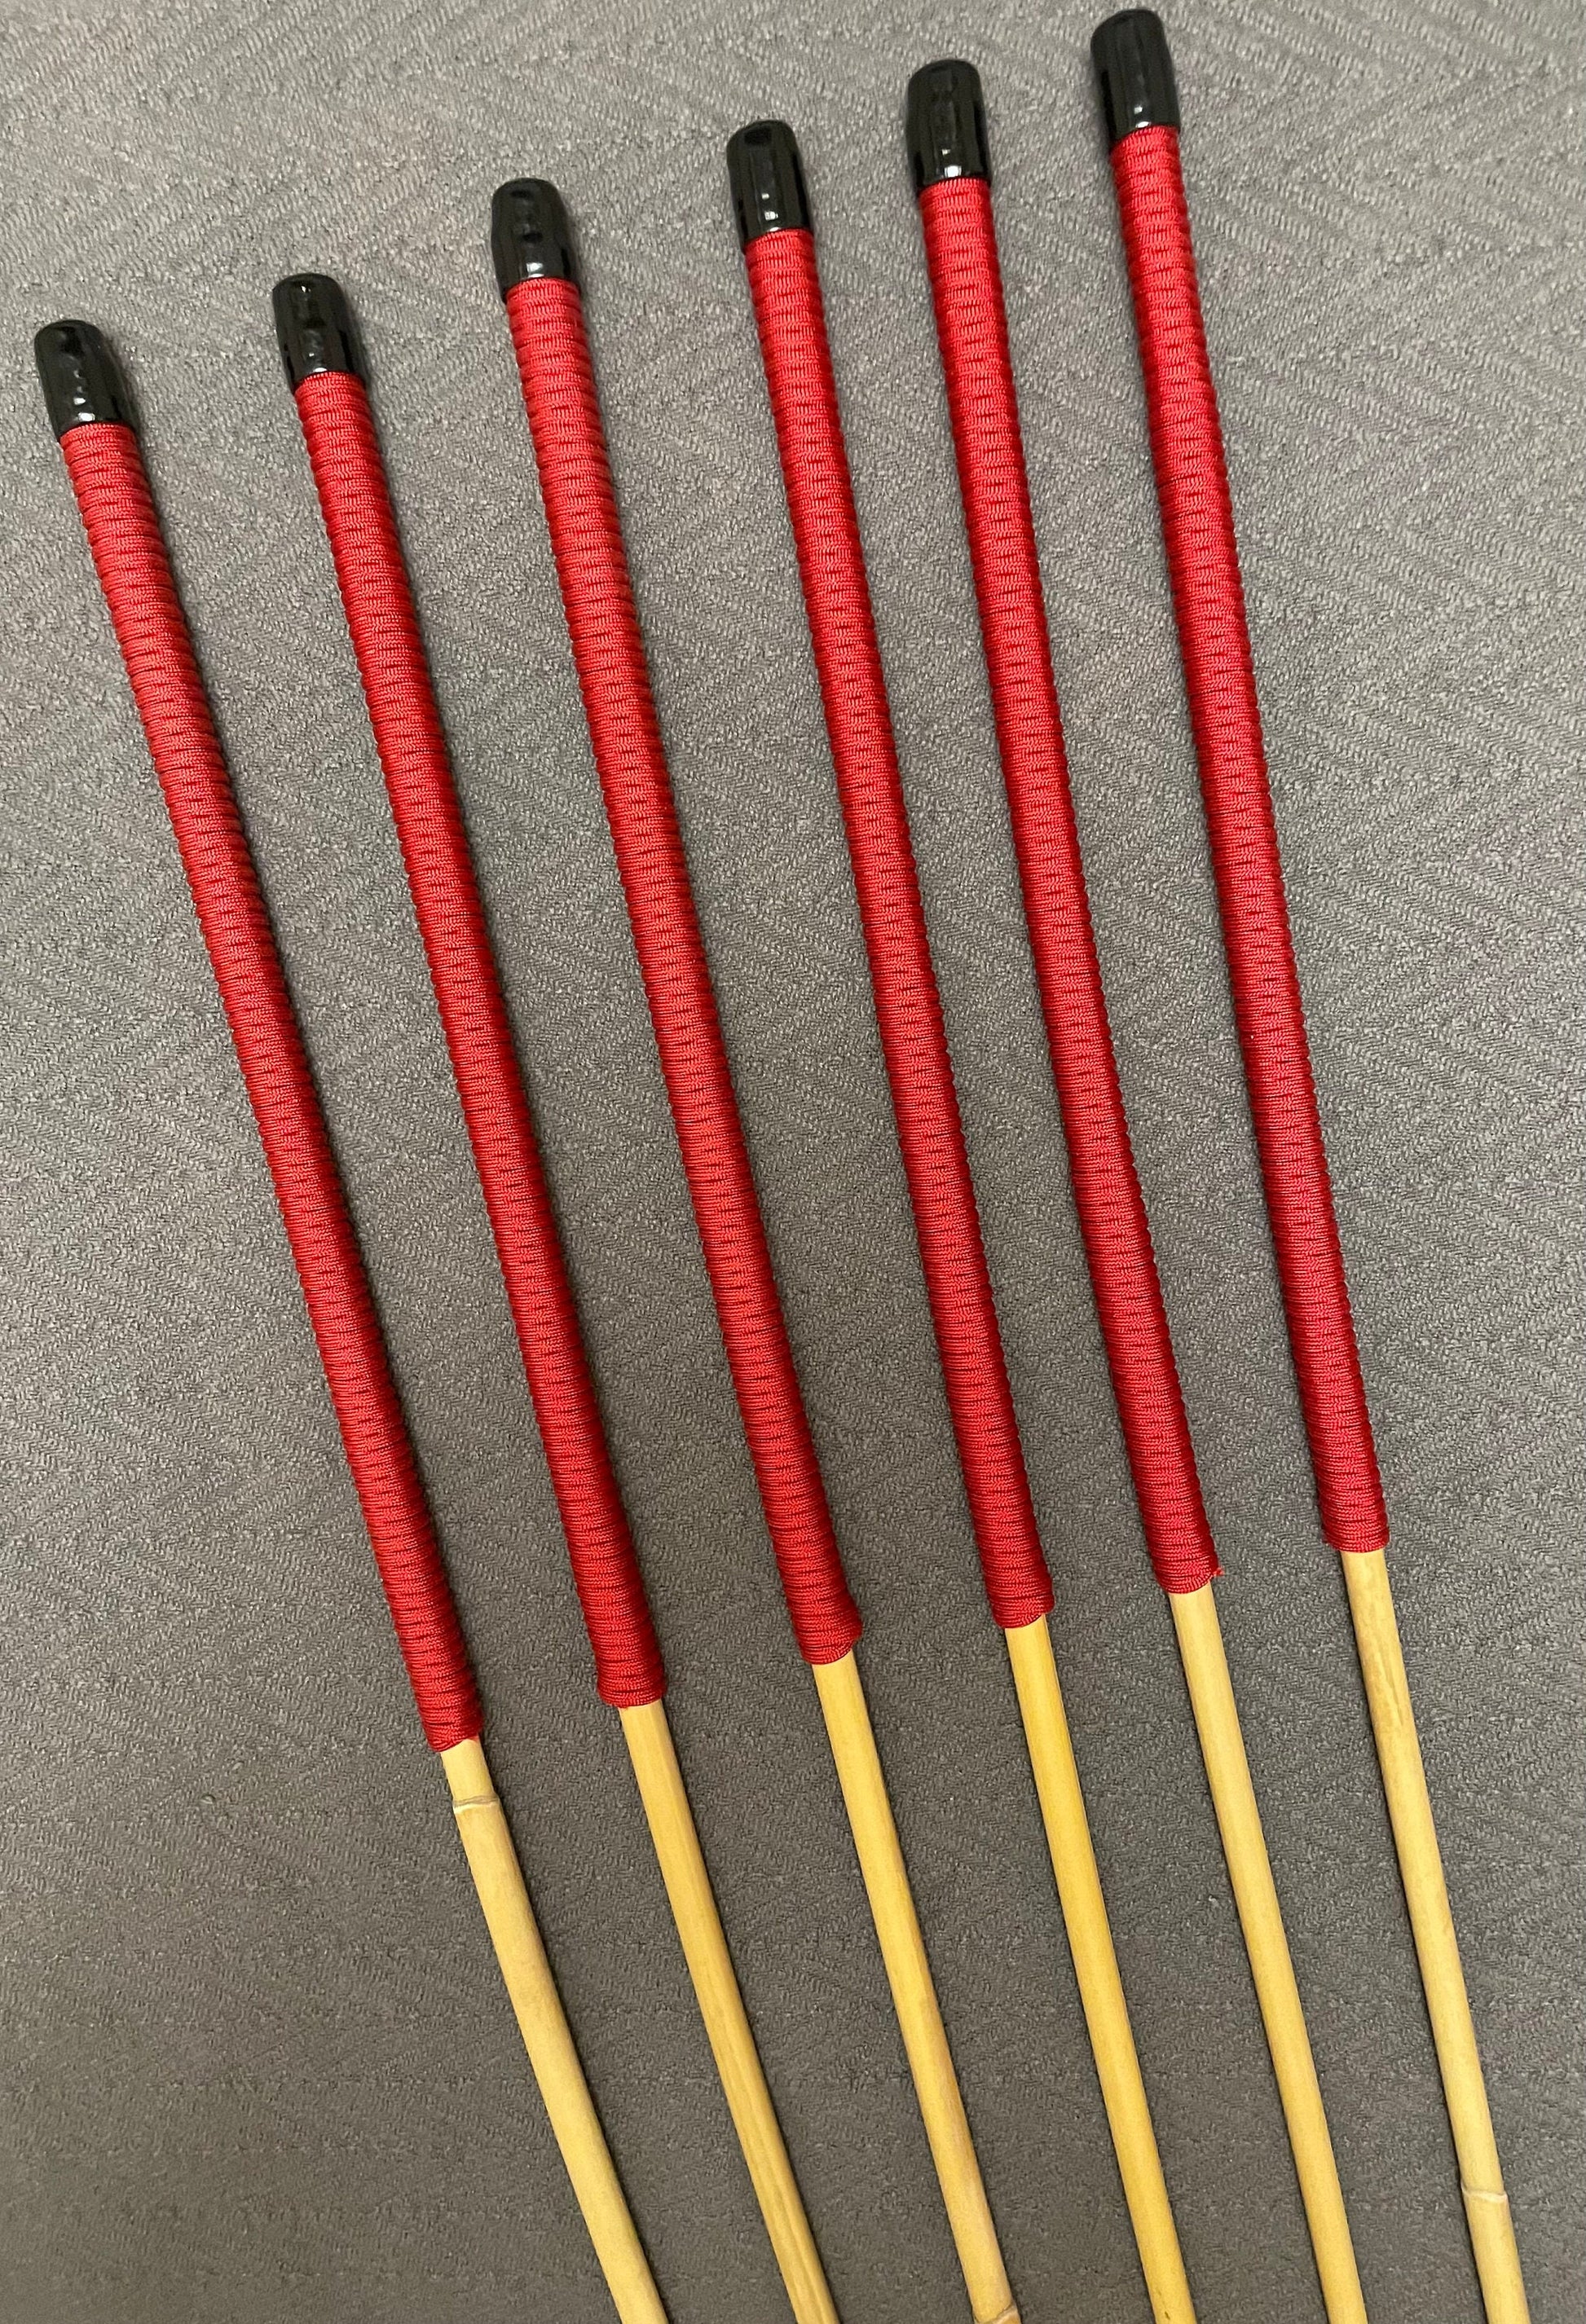 Thick and Thuddy Dragon Cane Set of 6 Rattan Canes / Whipping Canes / BDSM Canes - 100 cms Length - Red Paracord Handles